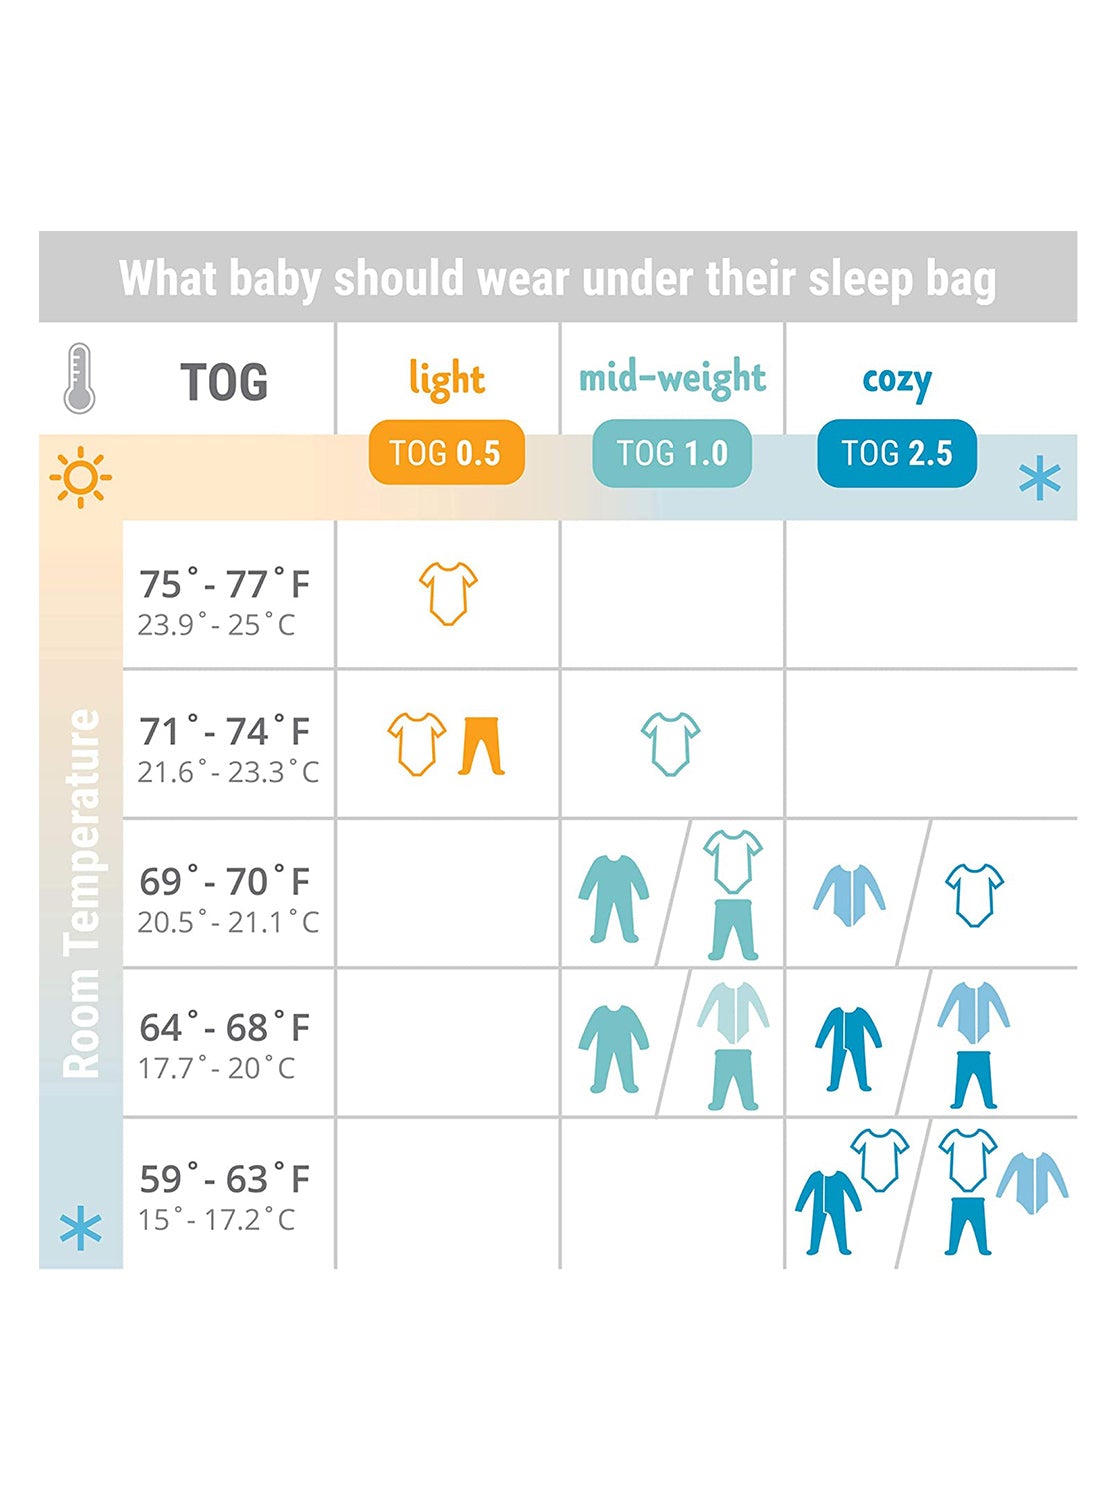 ERGOBABY On the Move Sleep Bag Large (18-36 Months) TOG 0.5 - ANB Baby -$20 - $50